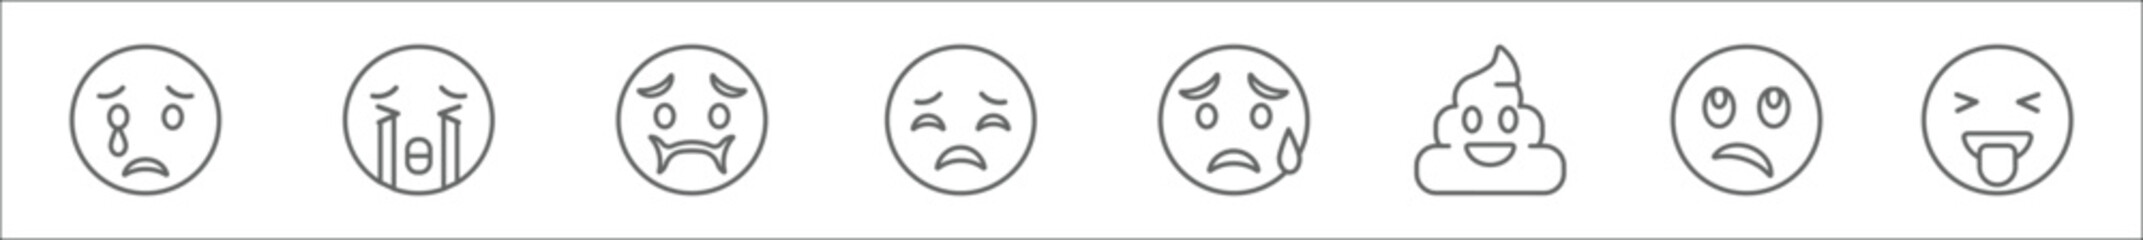 outline set of emoji line icons. linear vector icons such as cry emoji, crying emoji, nauseated disappointed worried poo sceptic crazy